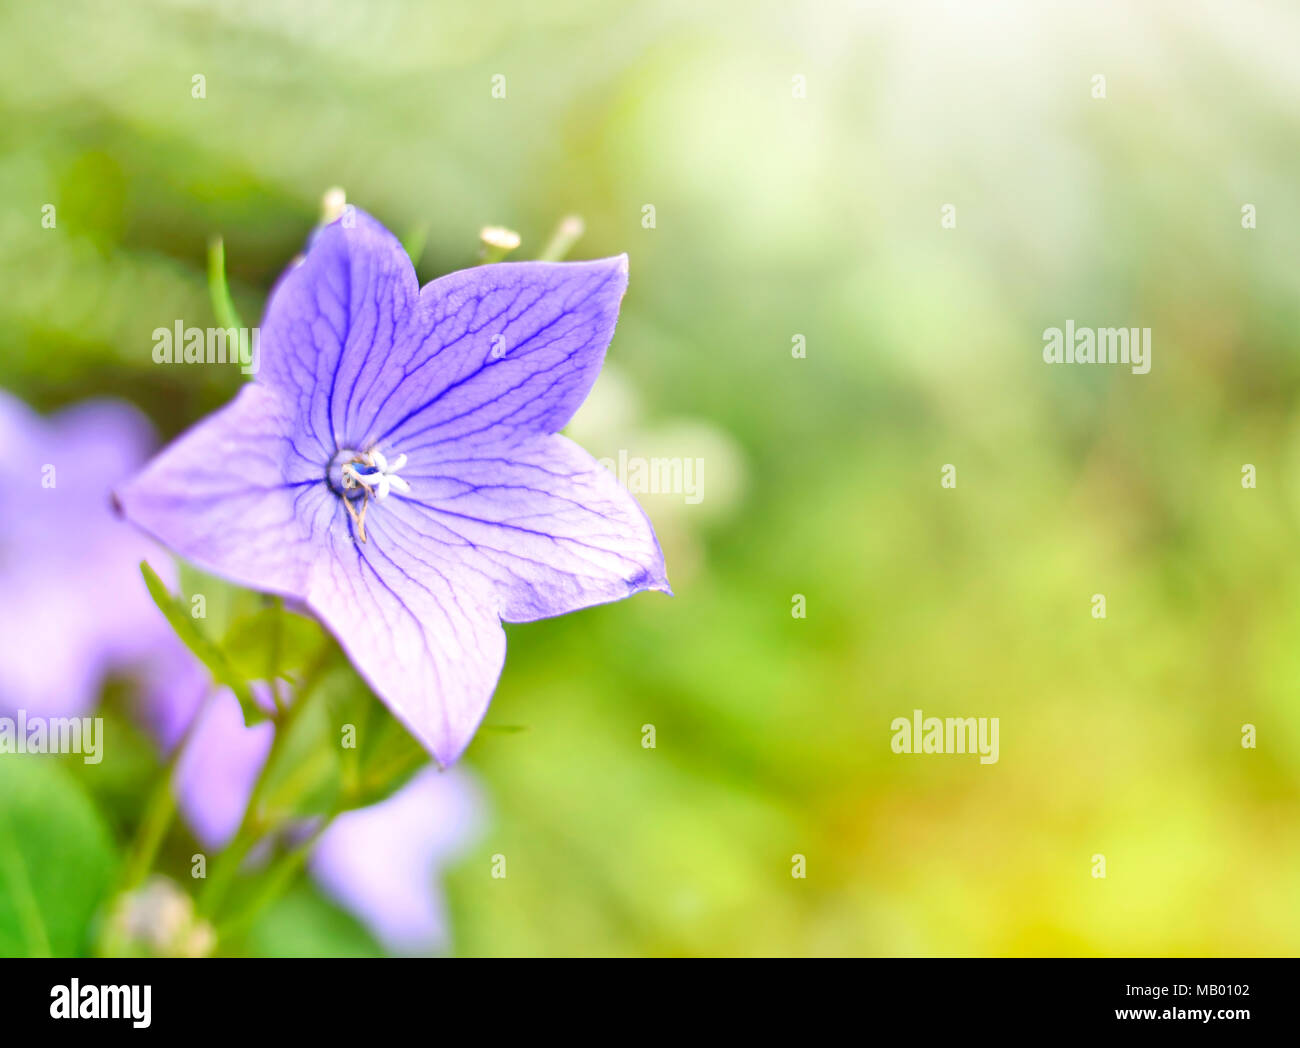 Blue helmet flower or balloon flower with selective focus and blur. Flower background, aconite. Stock Photo